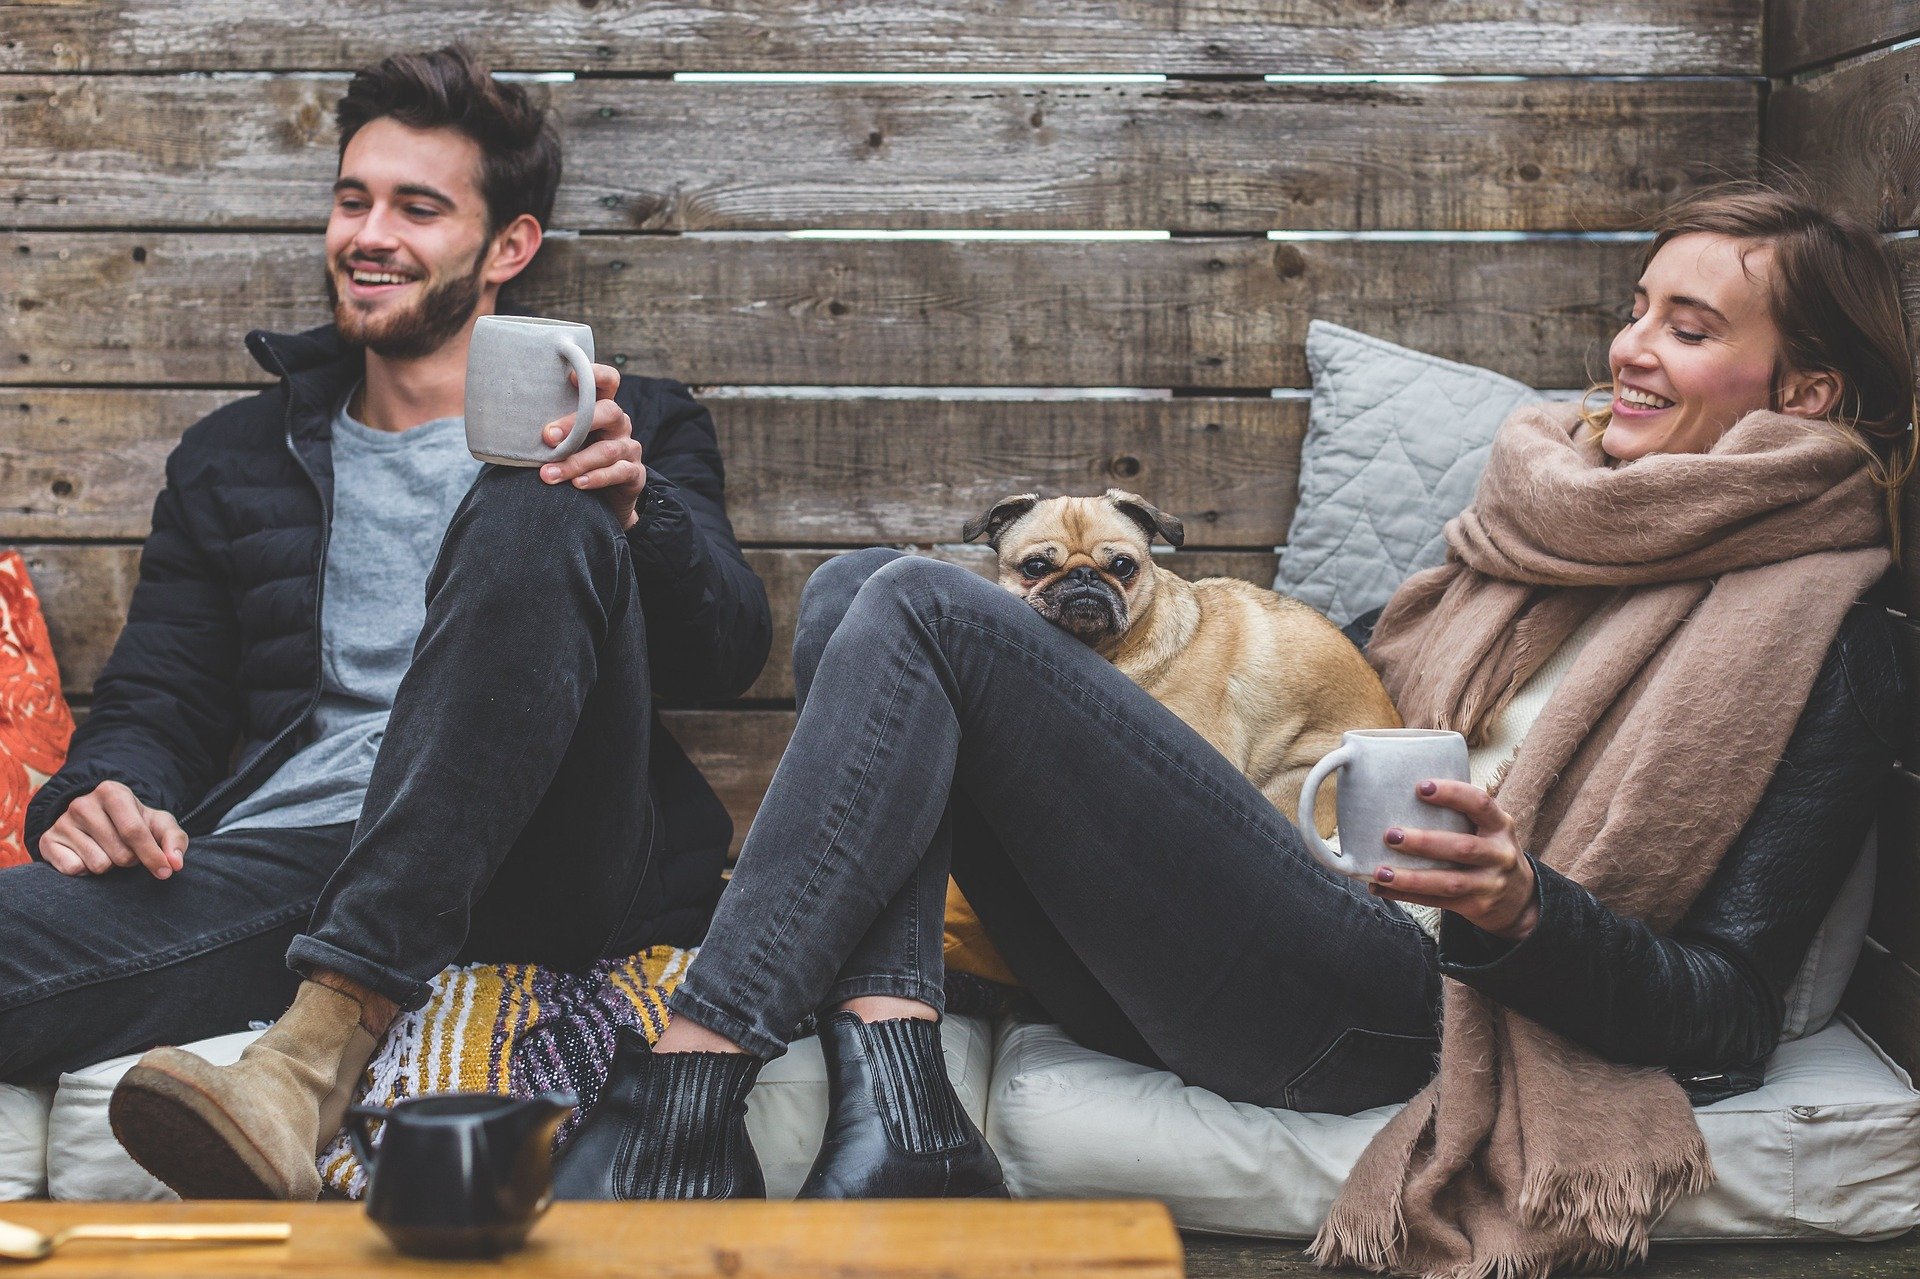 Two people relaxing with a dog and enjoying a conversation